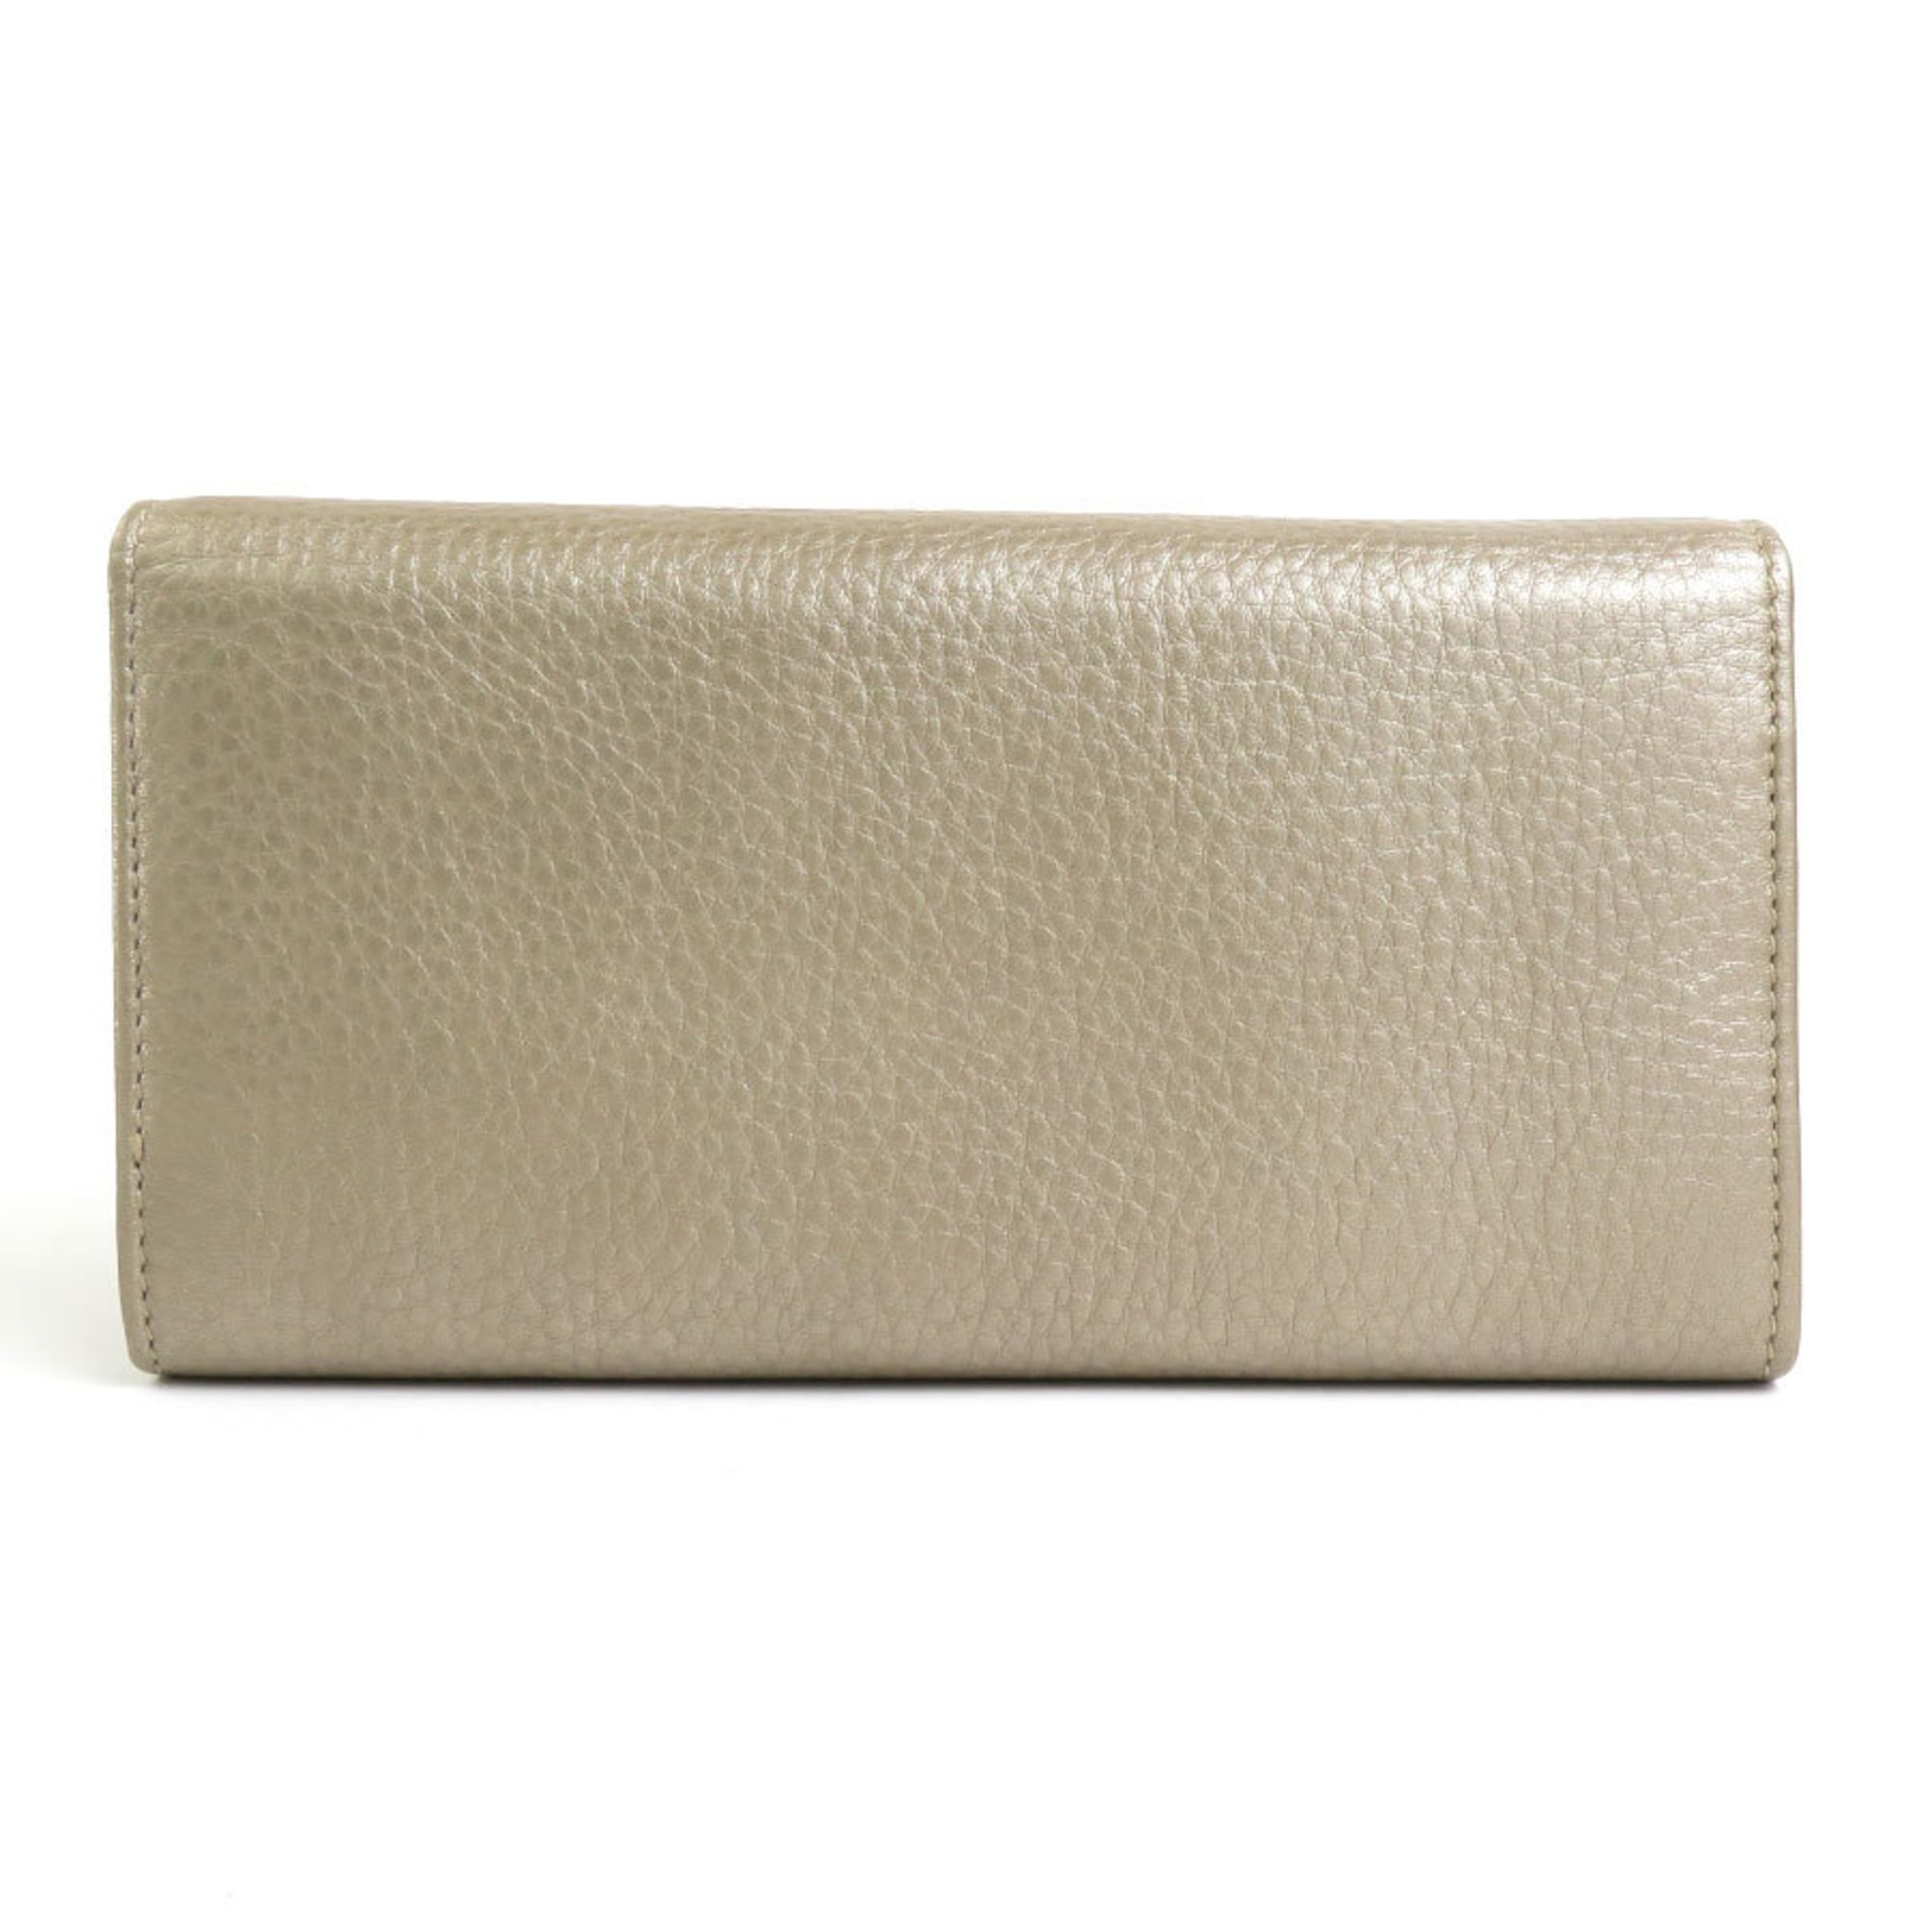 GUCCI long wallet leather gold ladies 251861